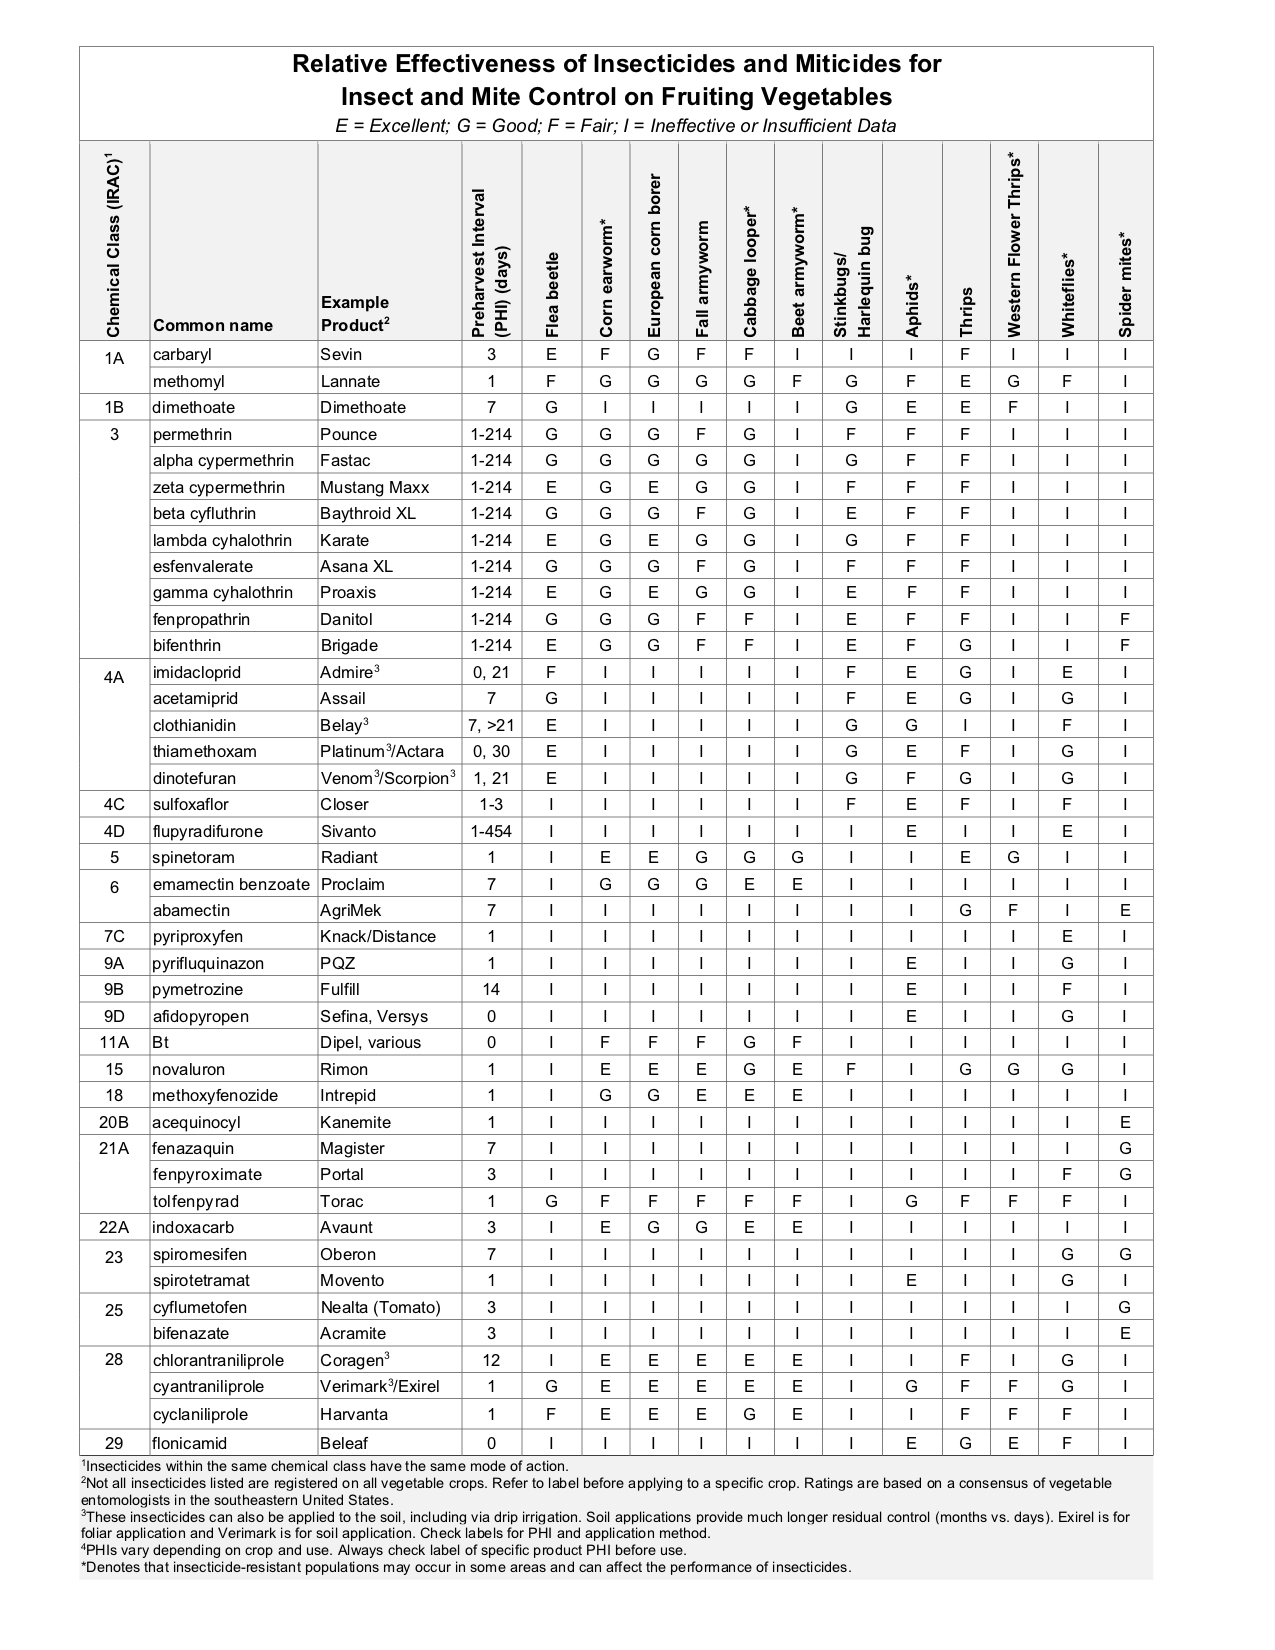 Table of relative effectiveness of insecticides on fruiting vegetables